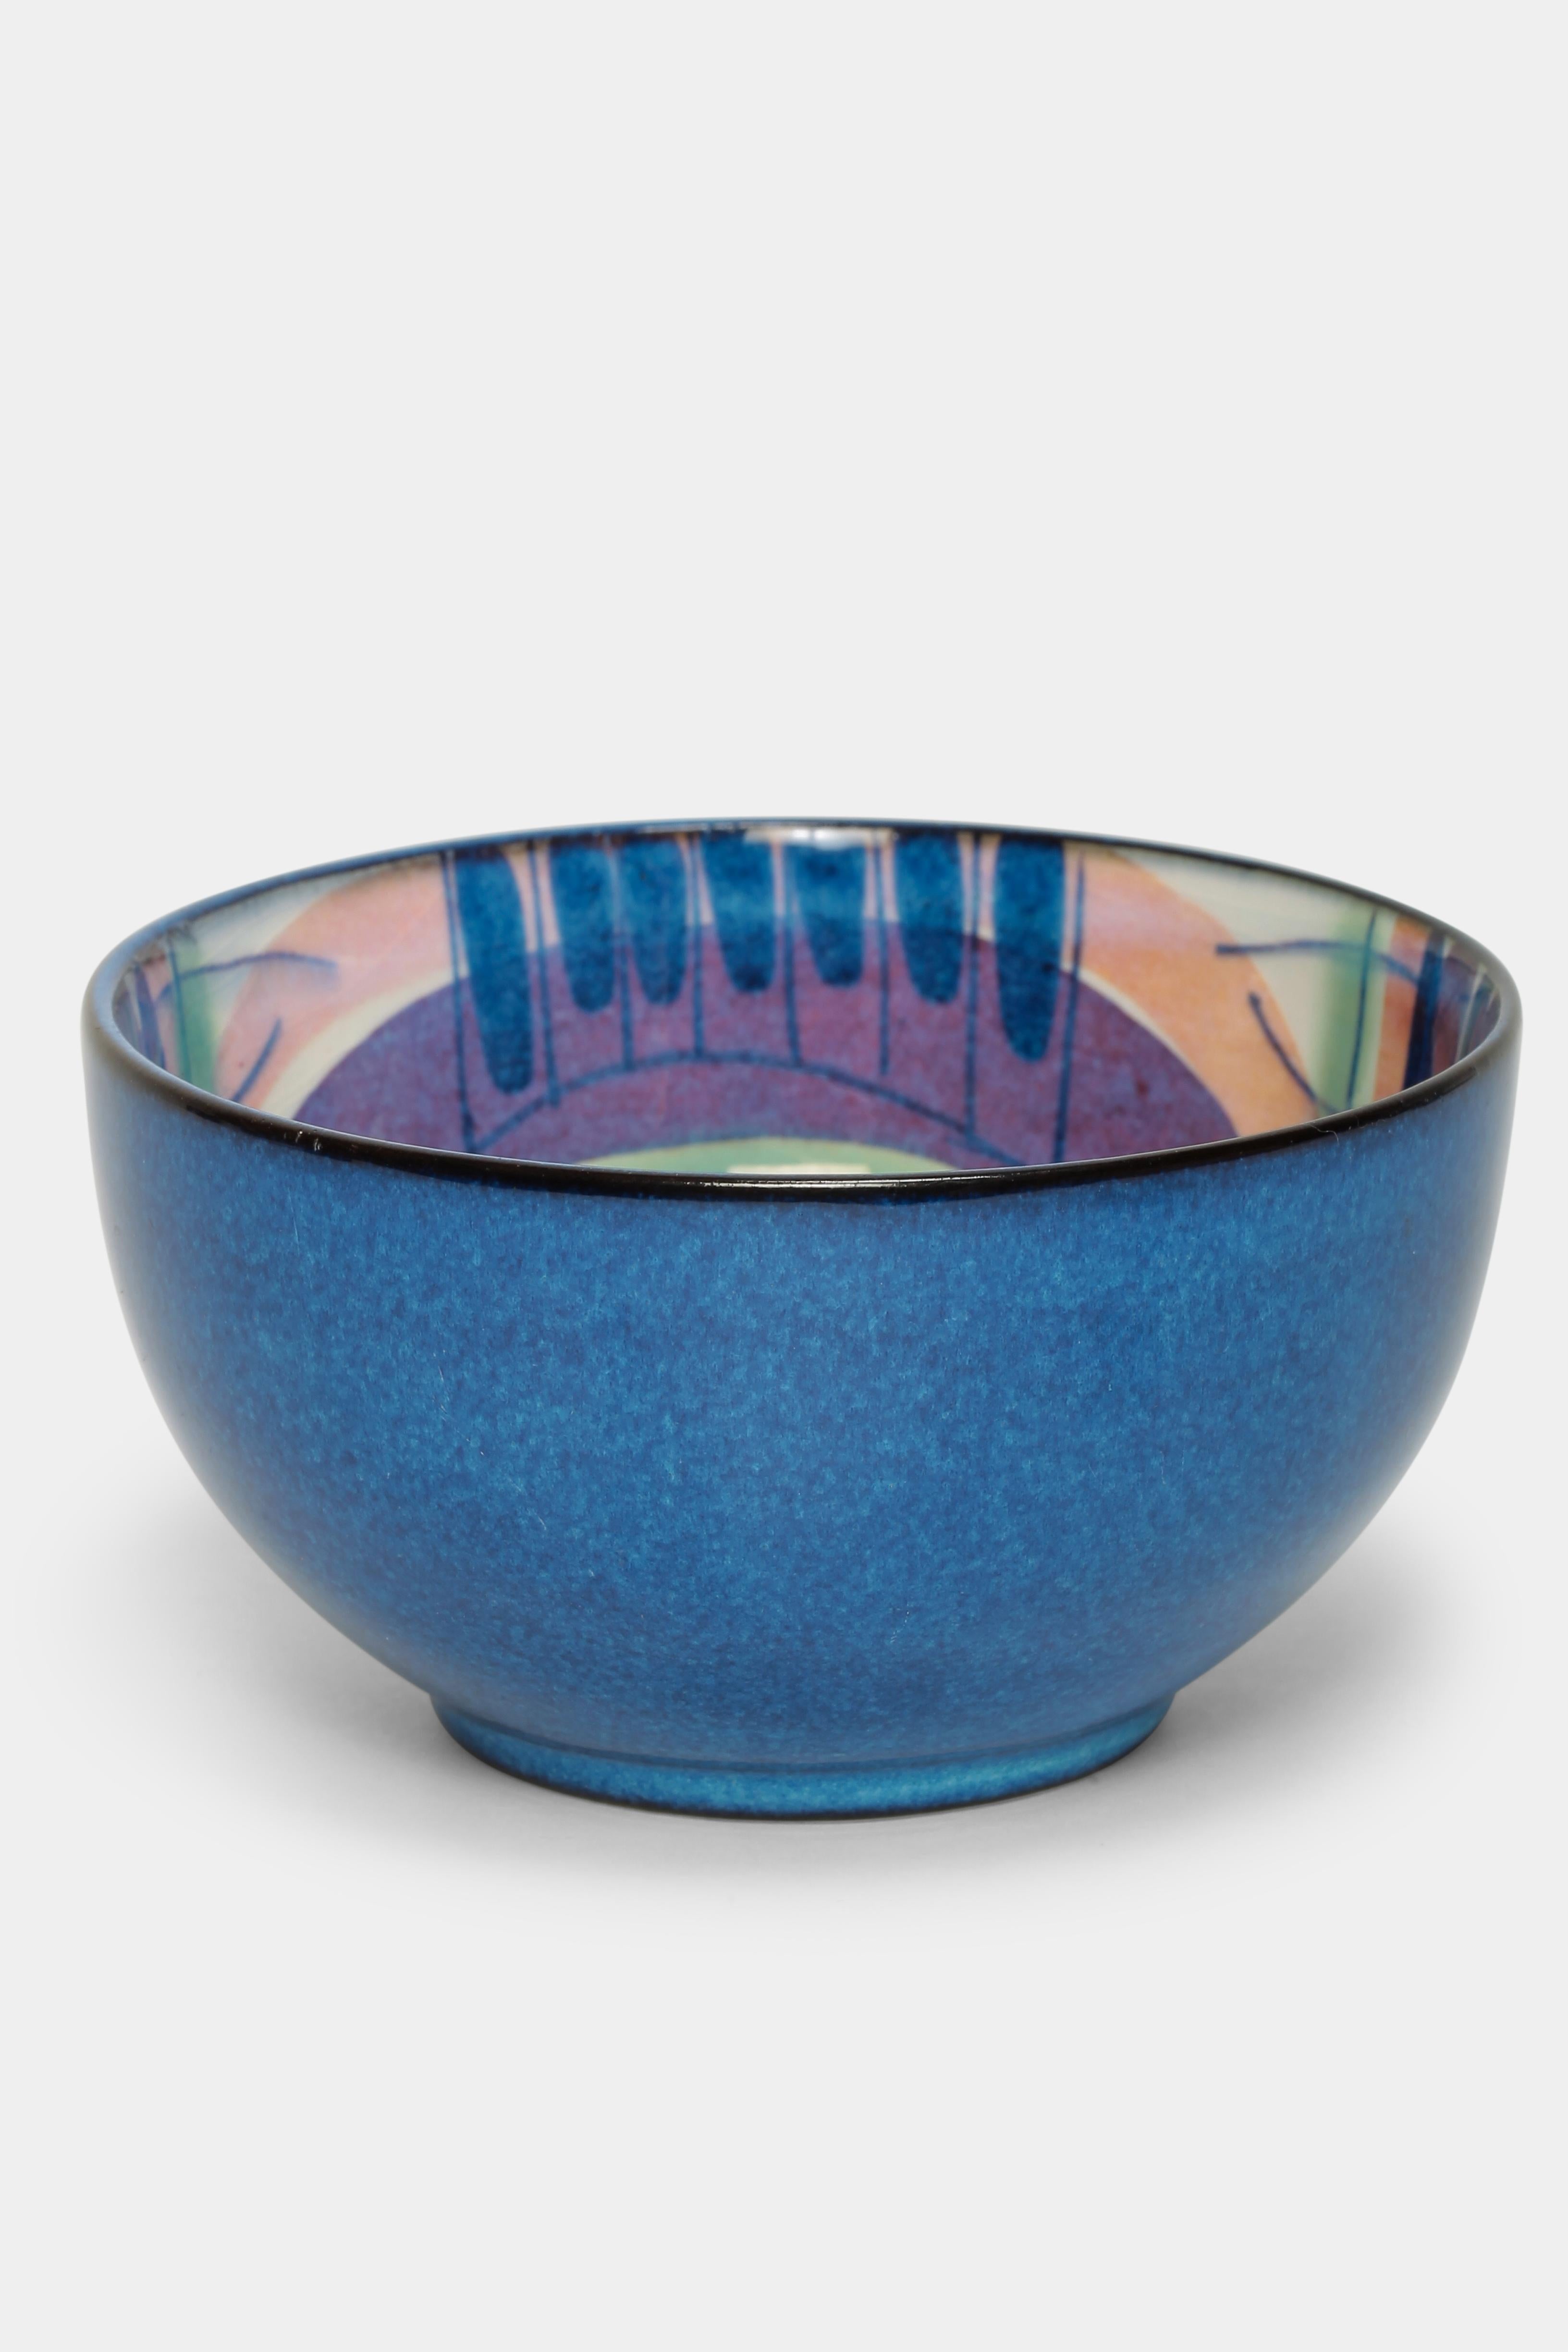 Marianne Johnson bowl made by Royal Copenhagen in the 1960s in Denmark. Painted ceramic bowl in with vibrant colors, bright details and flowing transitions. Marked at the bottom with the designer’s initials and numbered 137/2196.